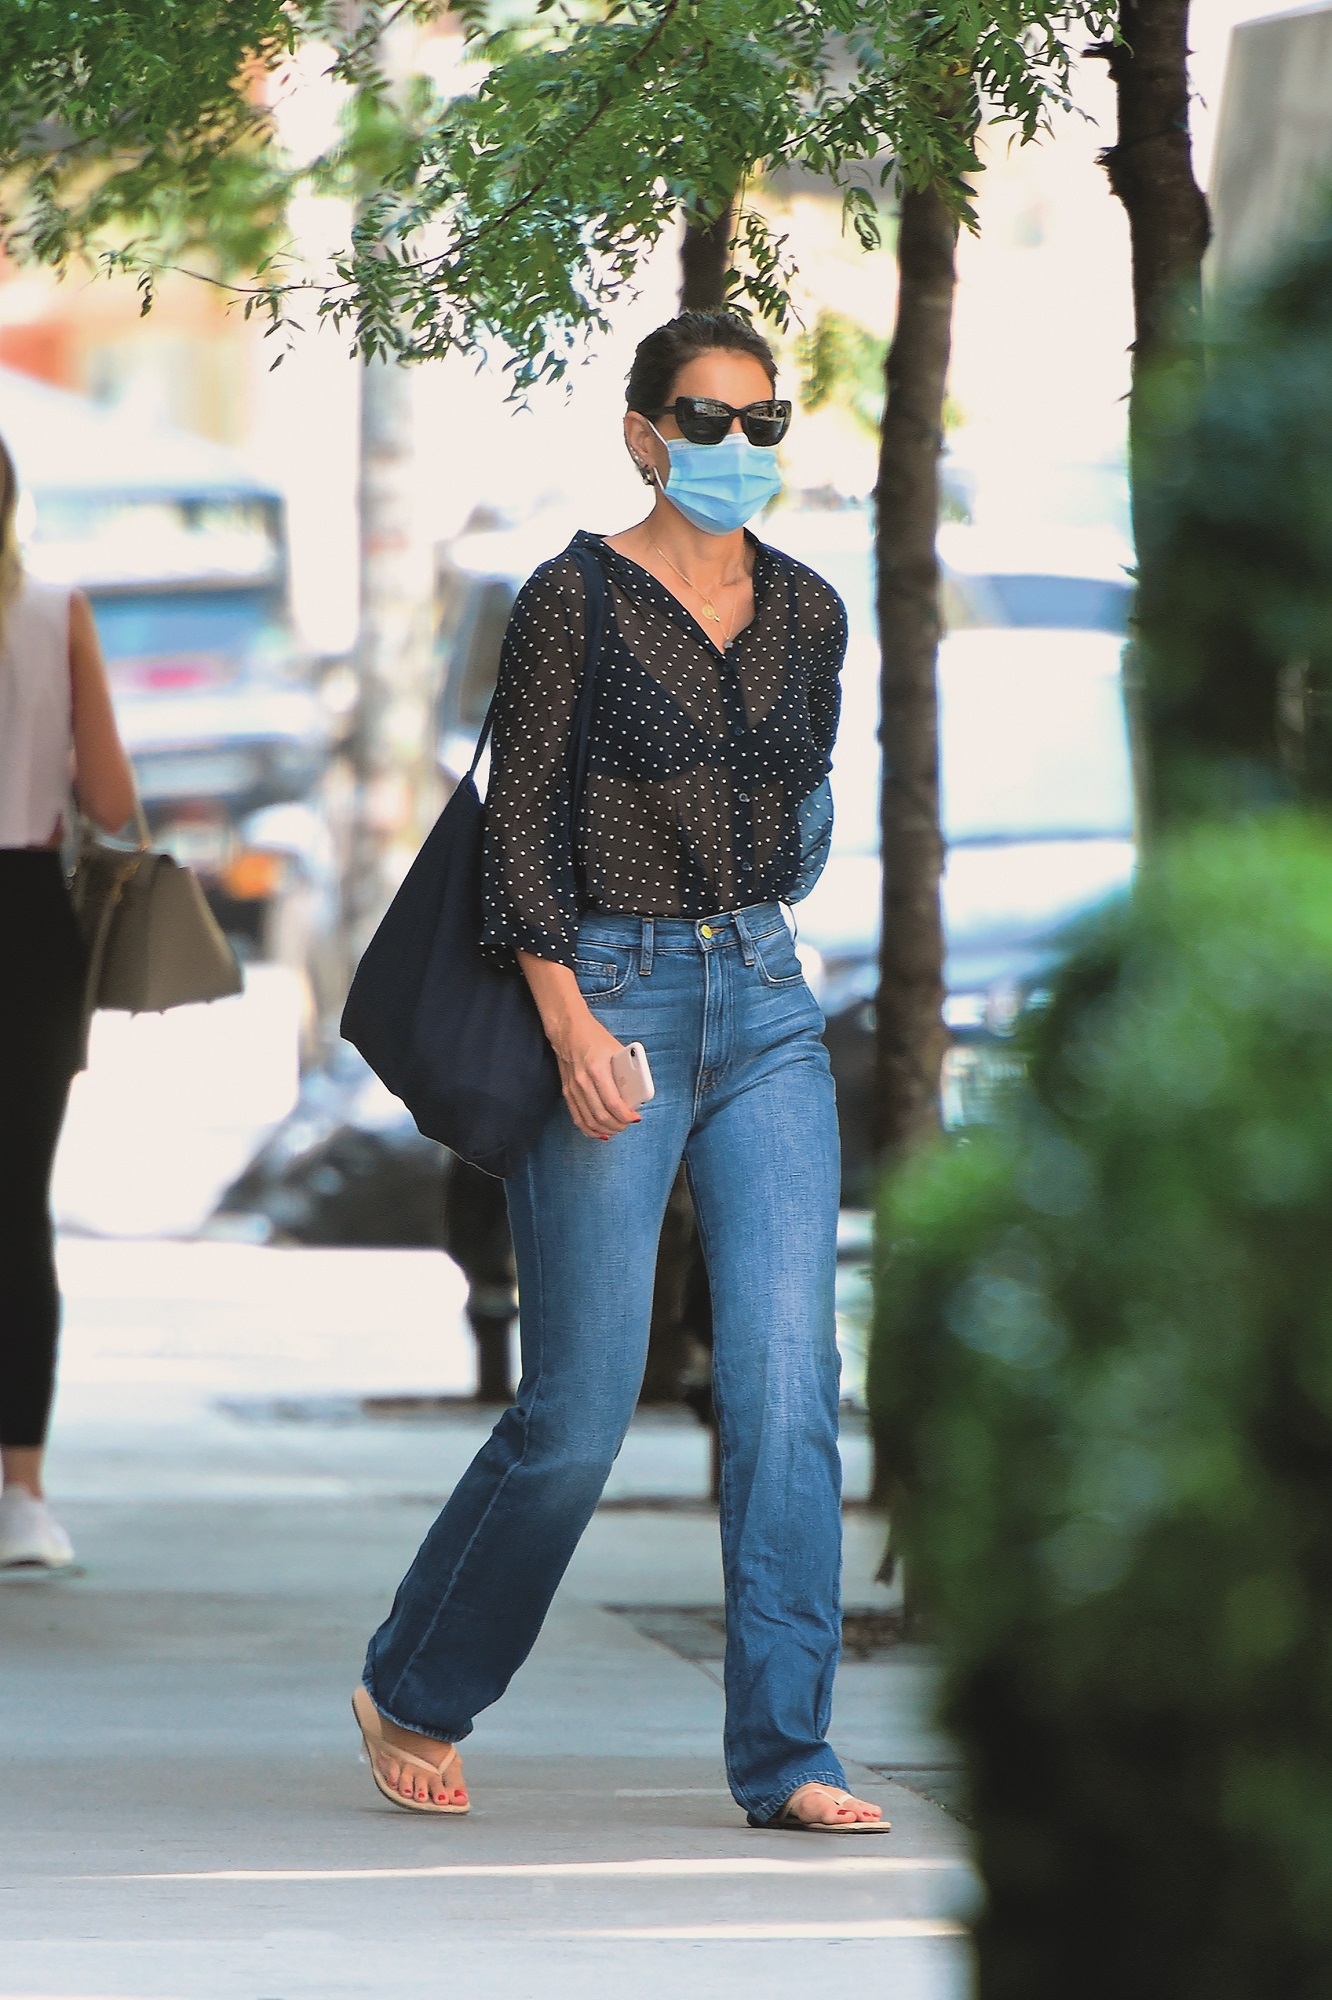 NEW YORK, NY - AUGUST 28:  Katie Holmes is seen out and about in Manhattan on August 28, 2020 in New York City.  (Photo by Robert Kamau/GC Images)